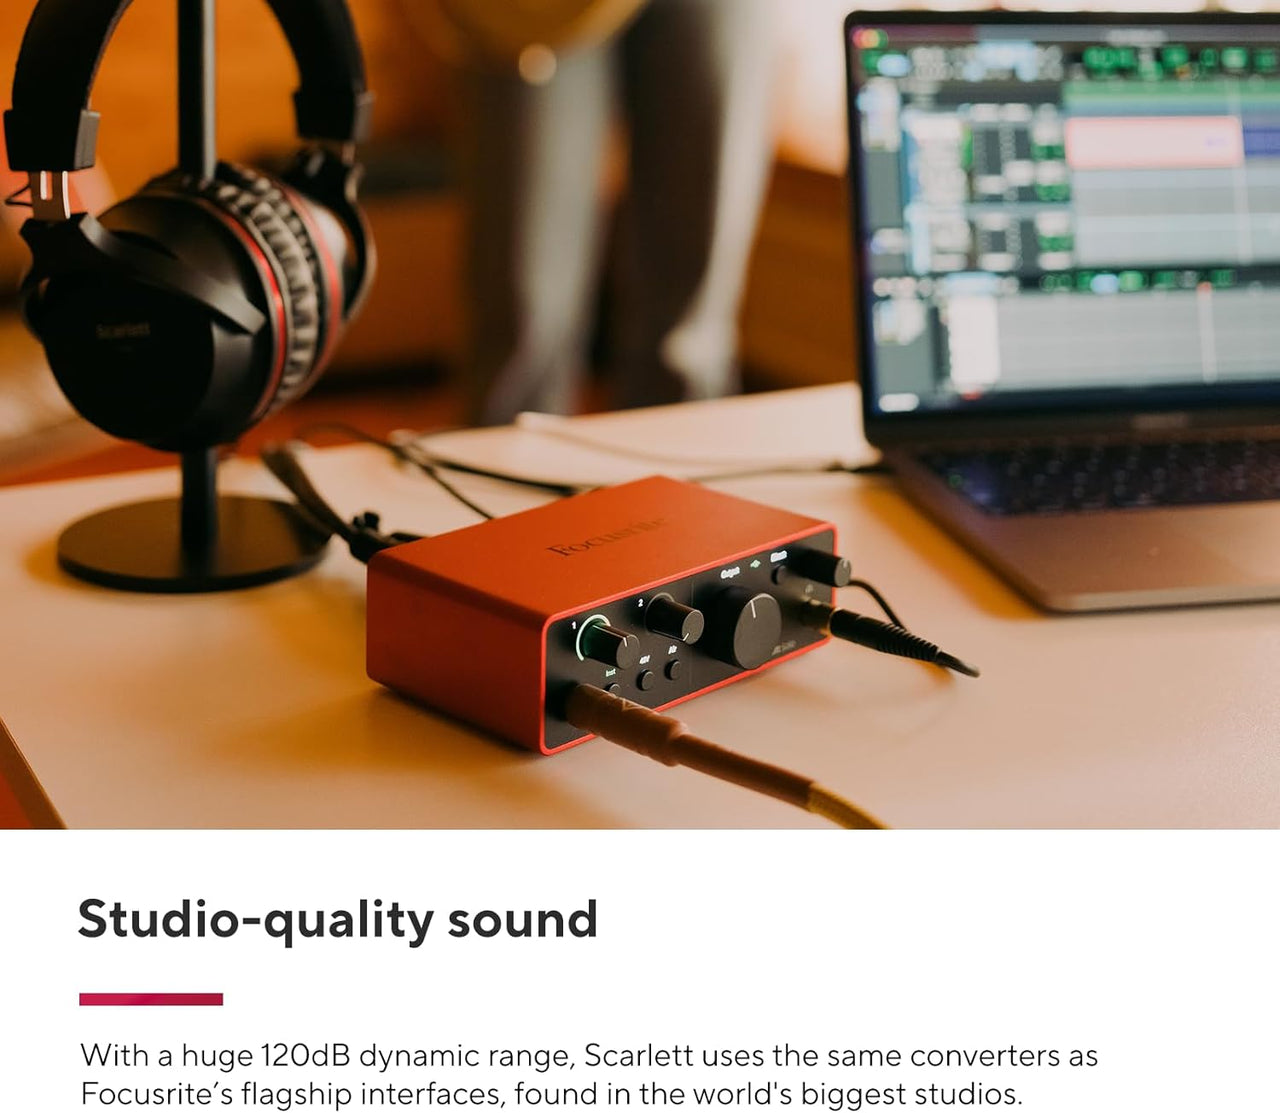 Focusrite Scarlett 2i2 Studio 4th Gen USB Audio Interface Bundle for the Songwriter with Condenser Microphone and Headphones for Recording, Streaming, and Podcasting